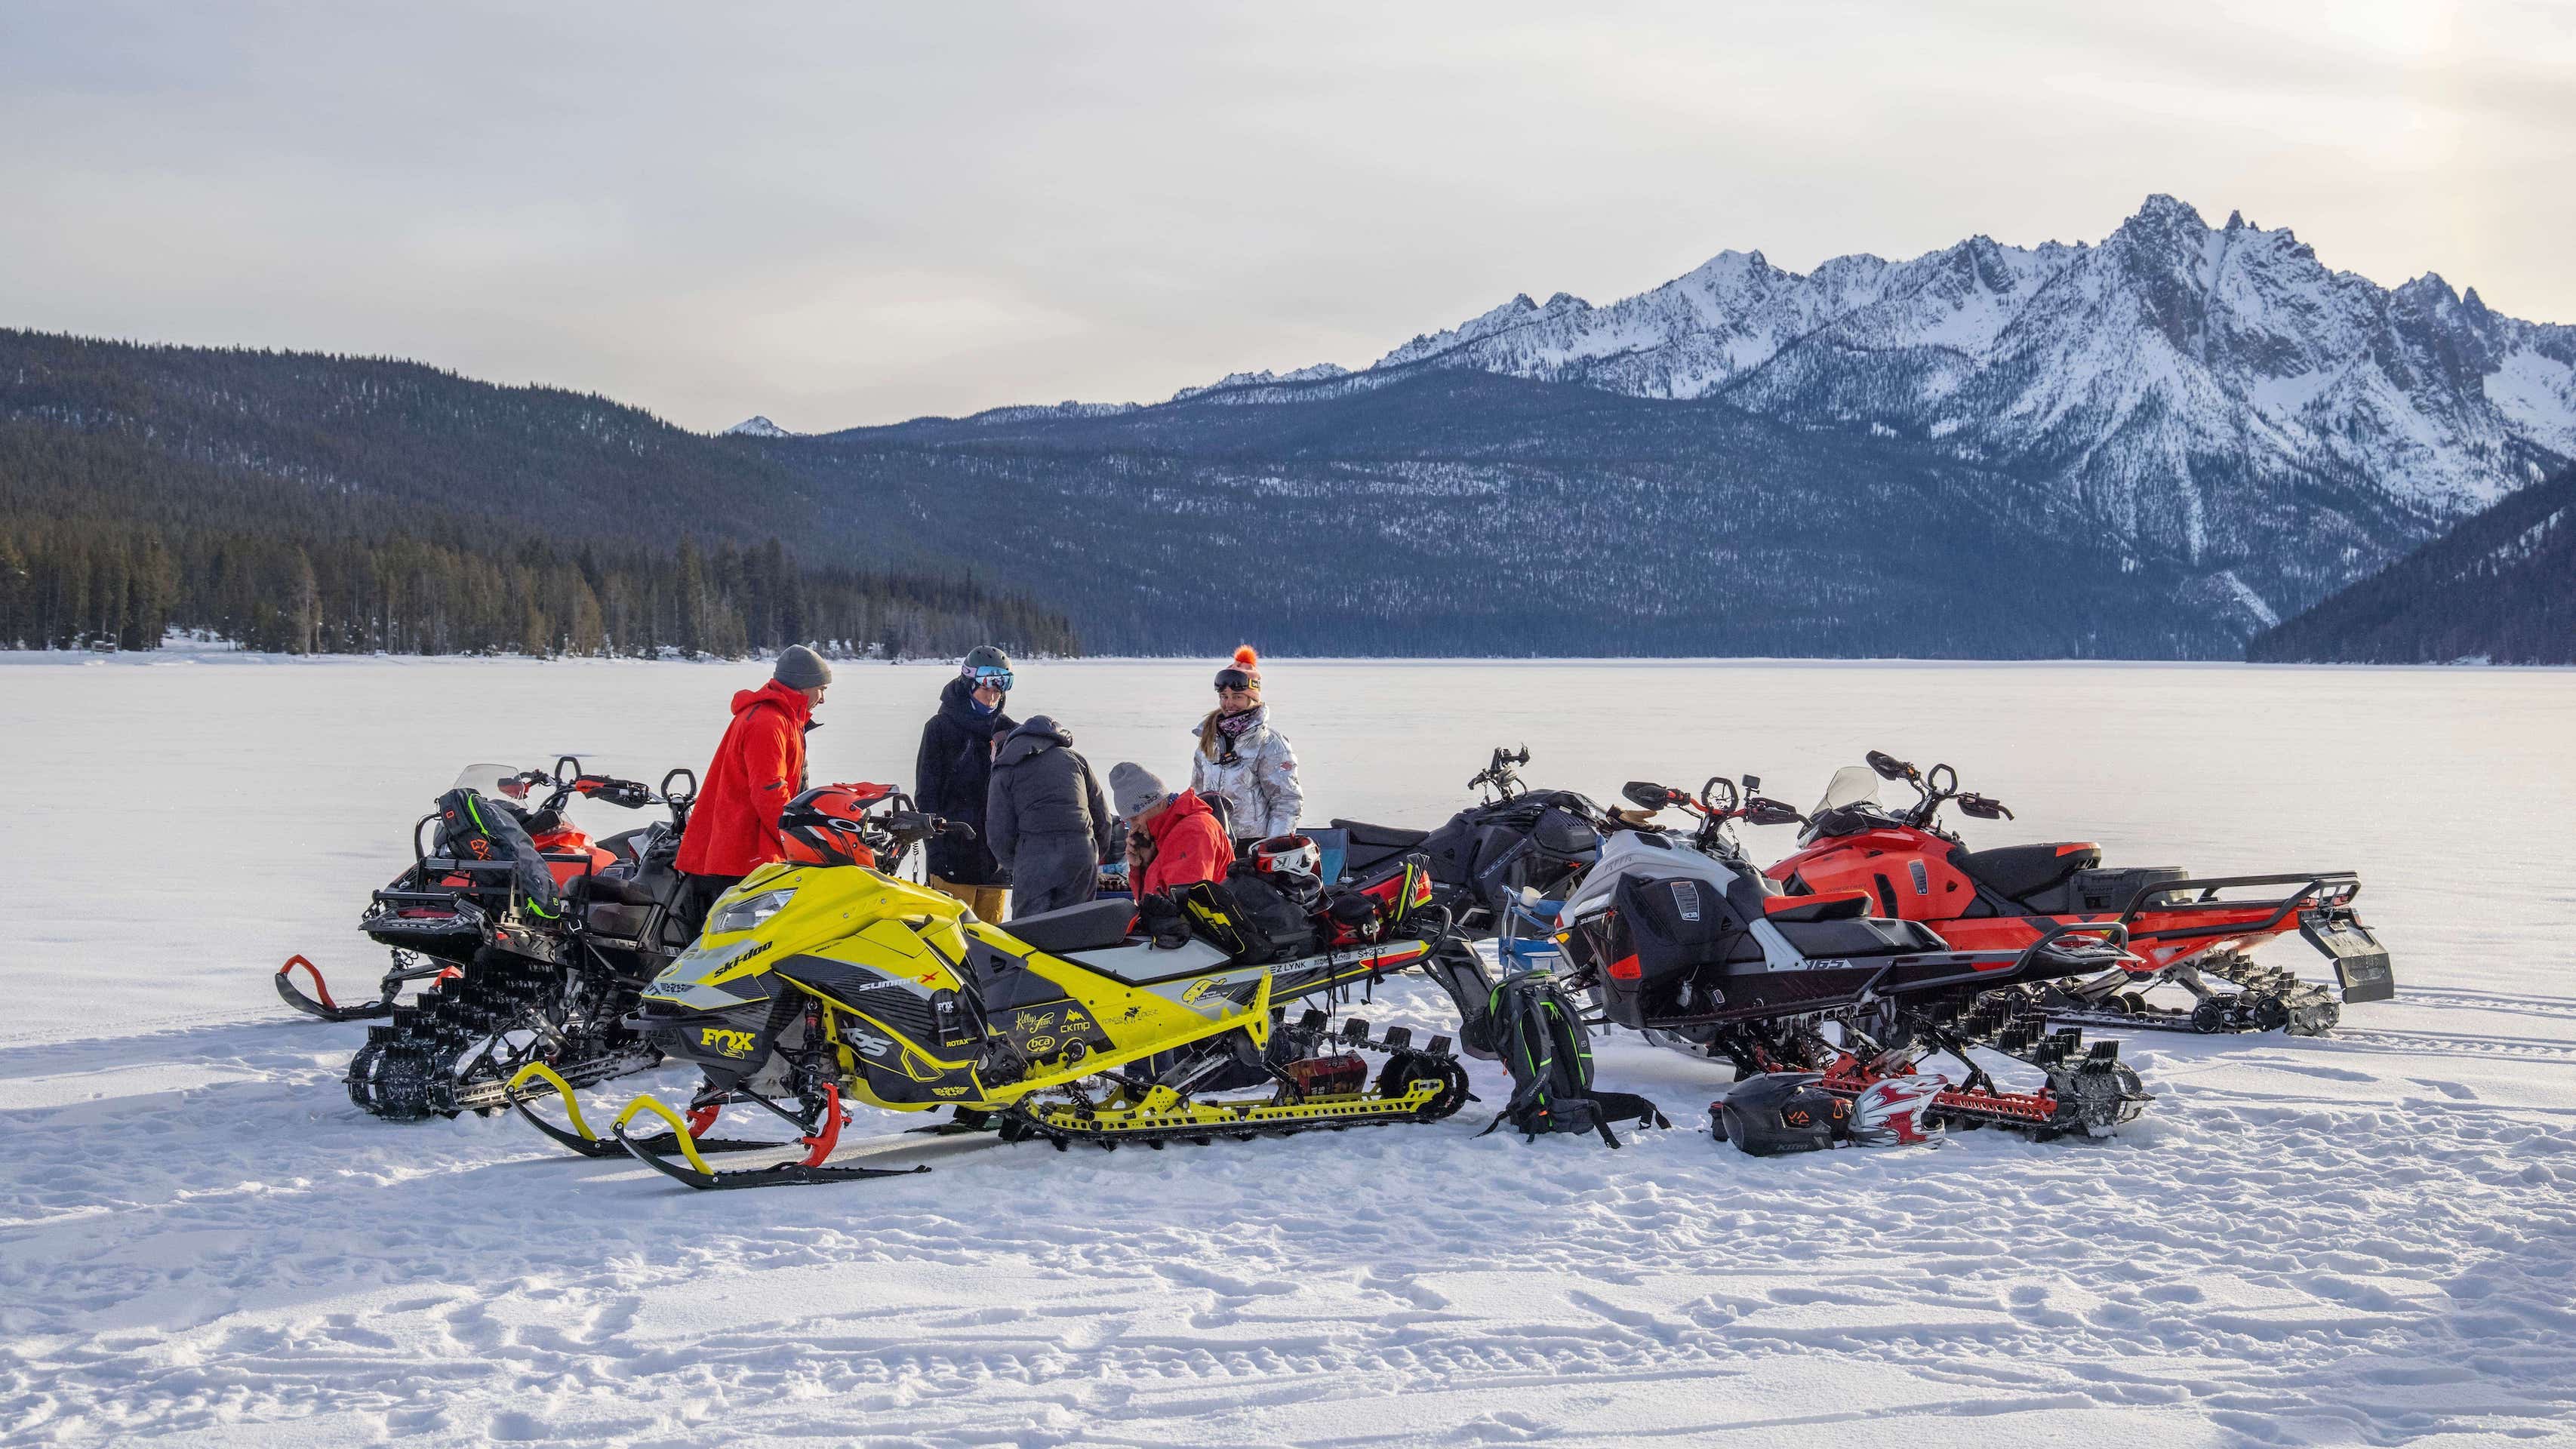 Crew of snowmobilers in front of mountains